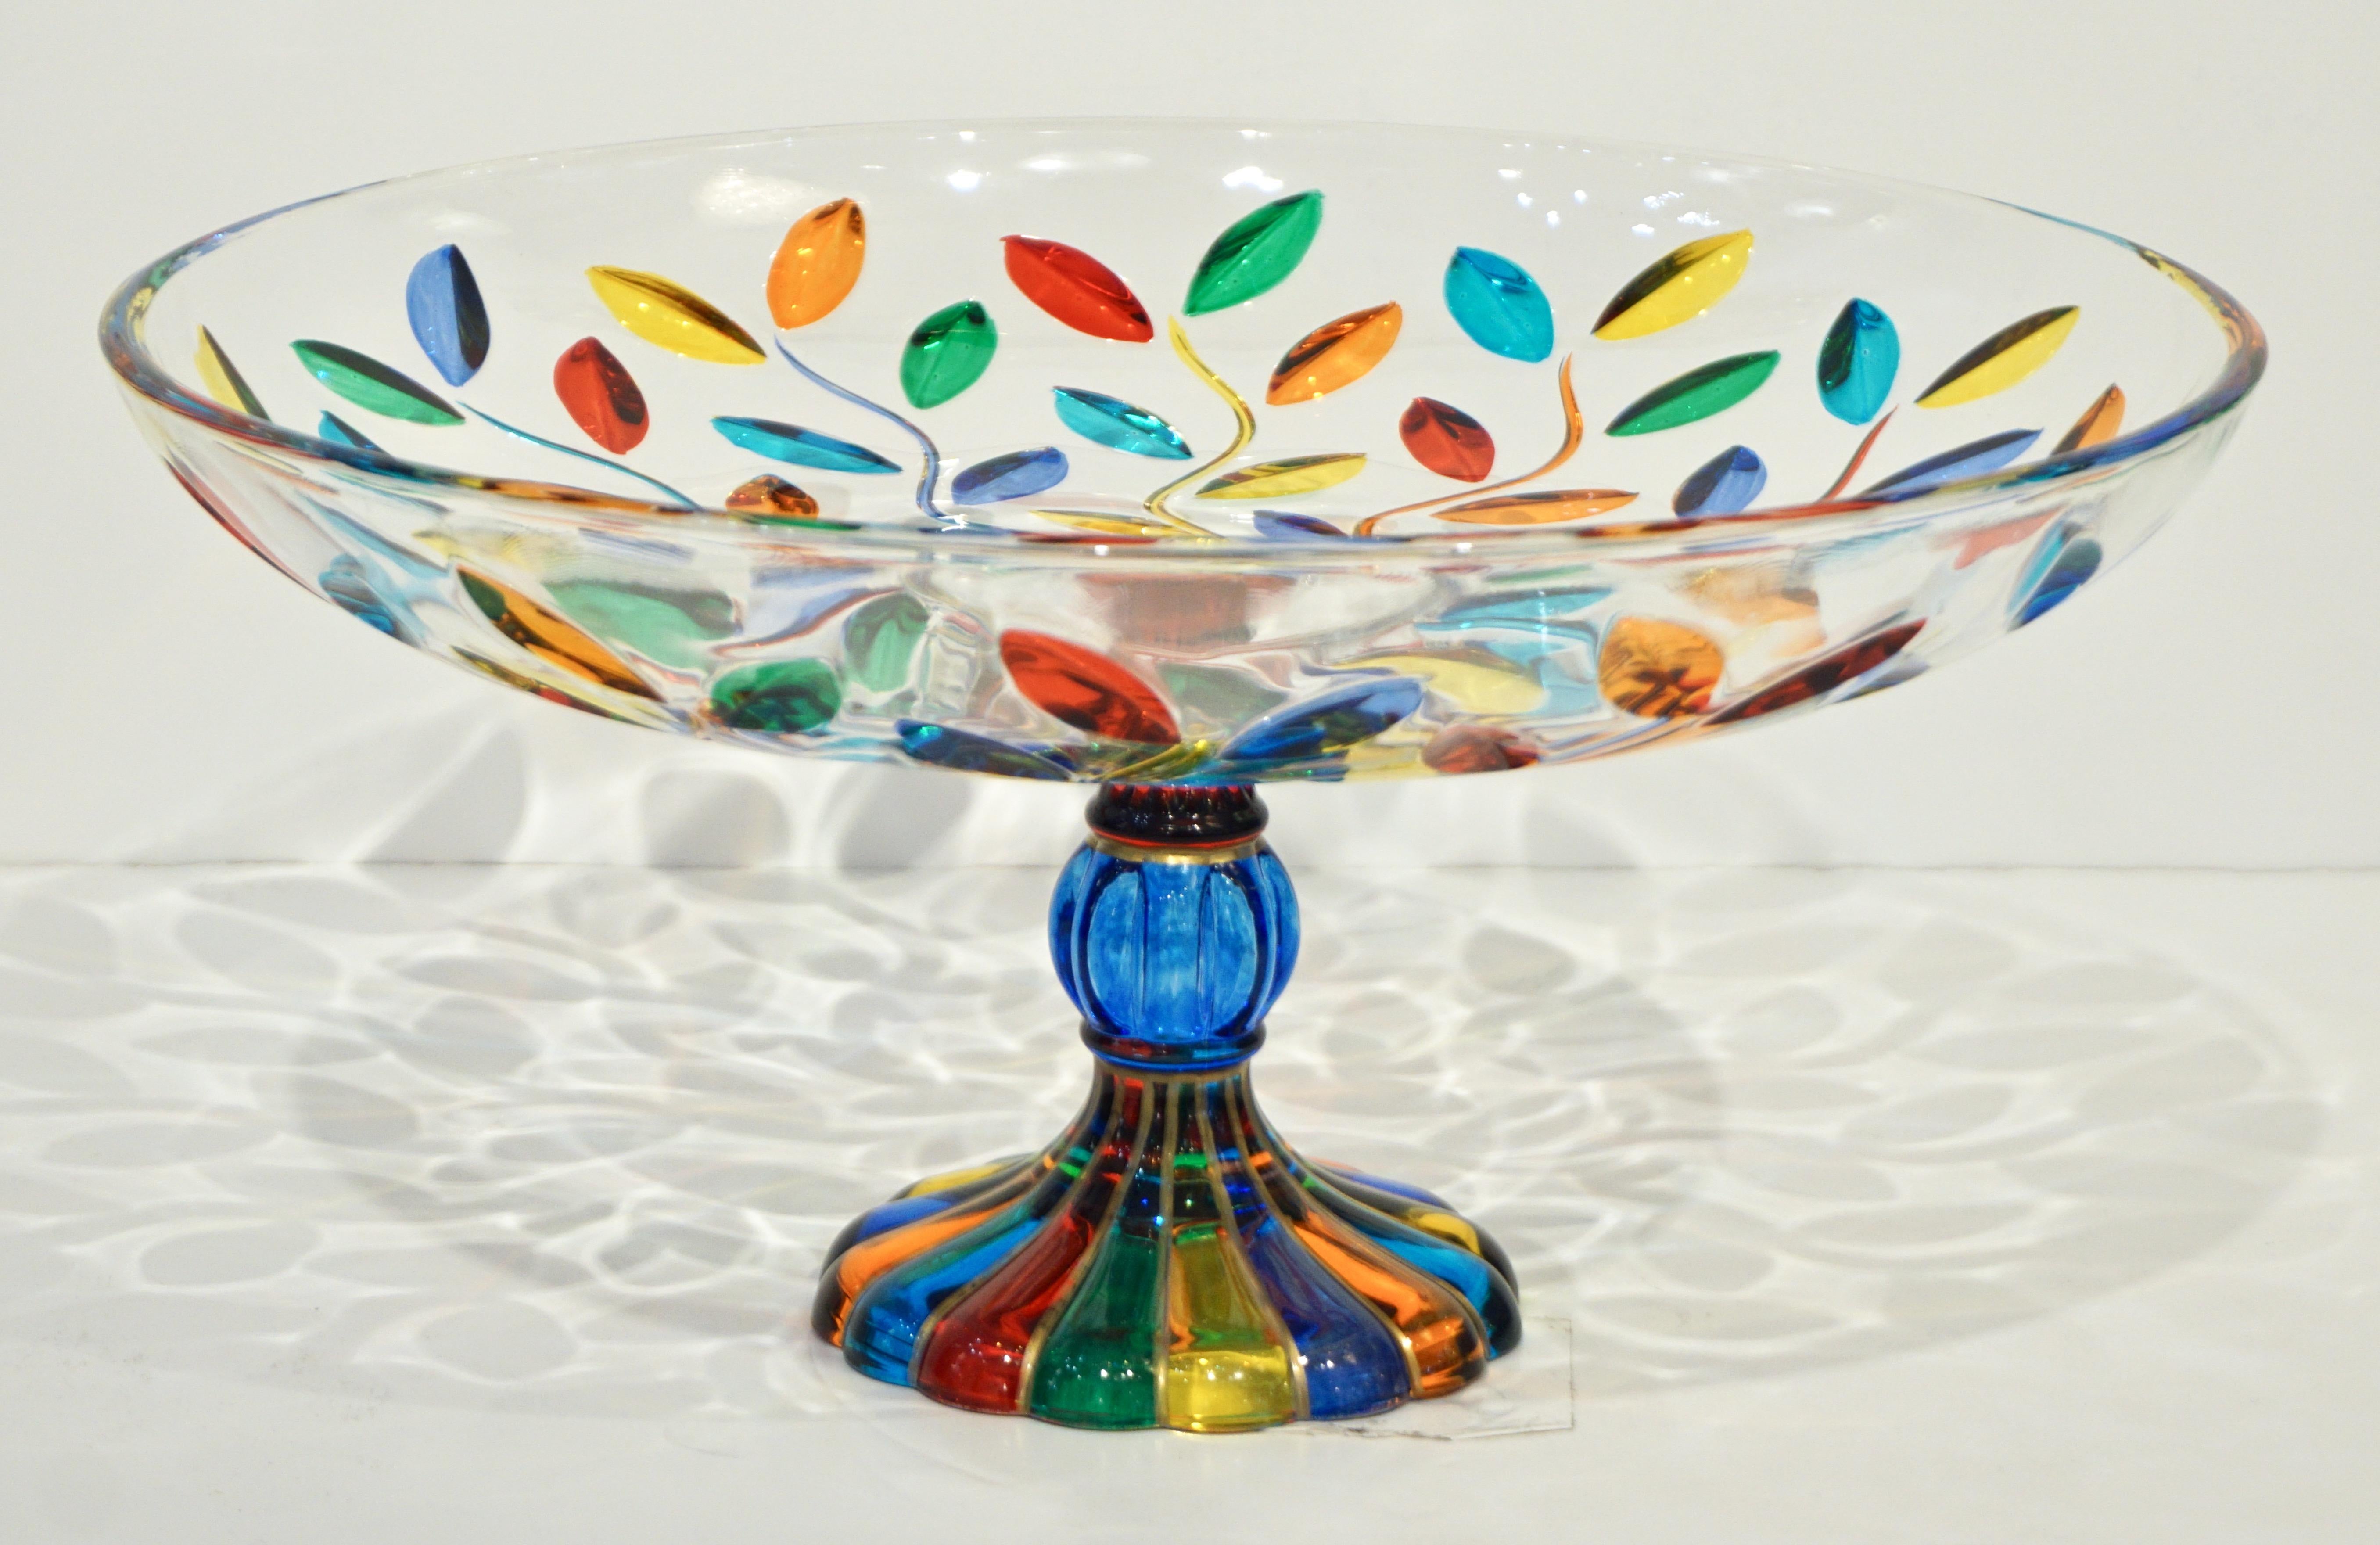 Colleoni Modern Crystal Murano Glass Compote Dish / Tazza with Colorful Leaves 3